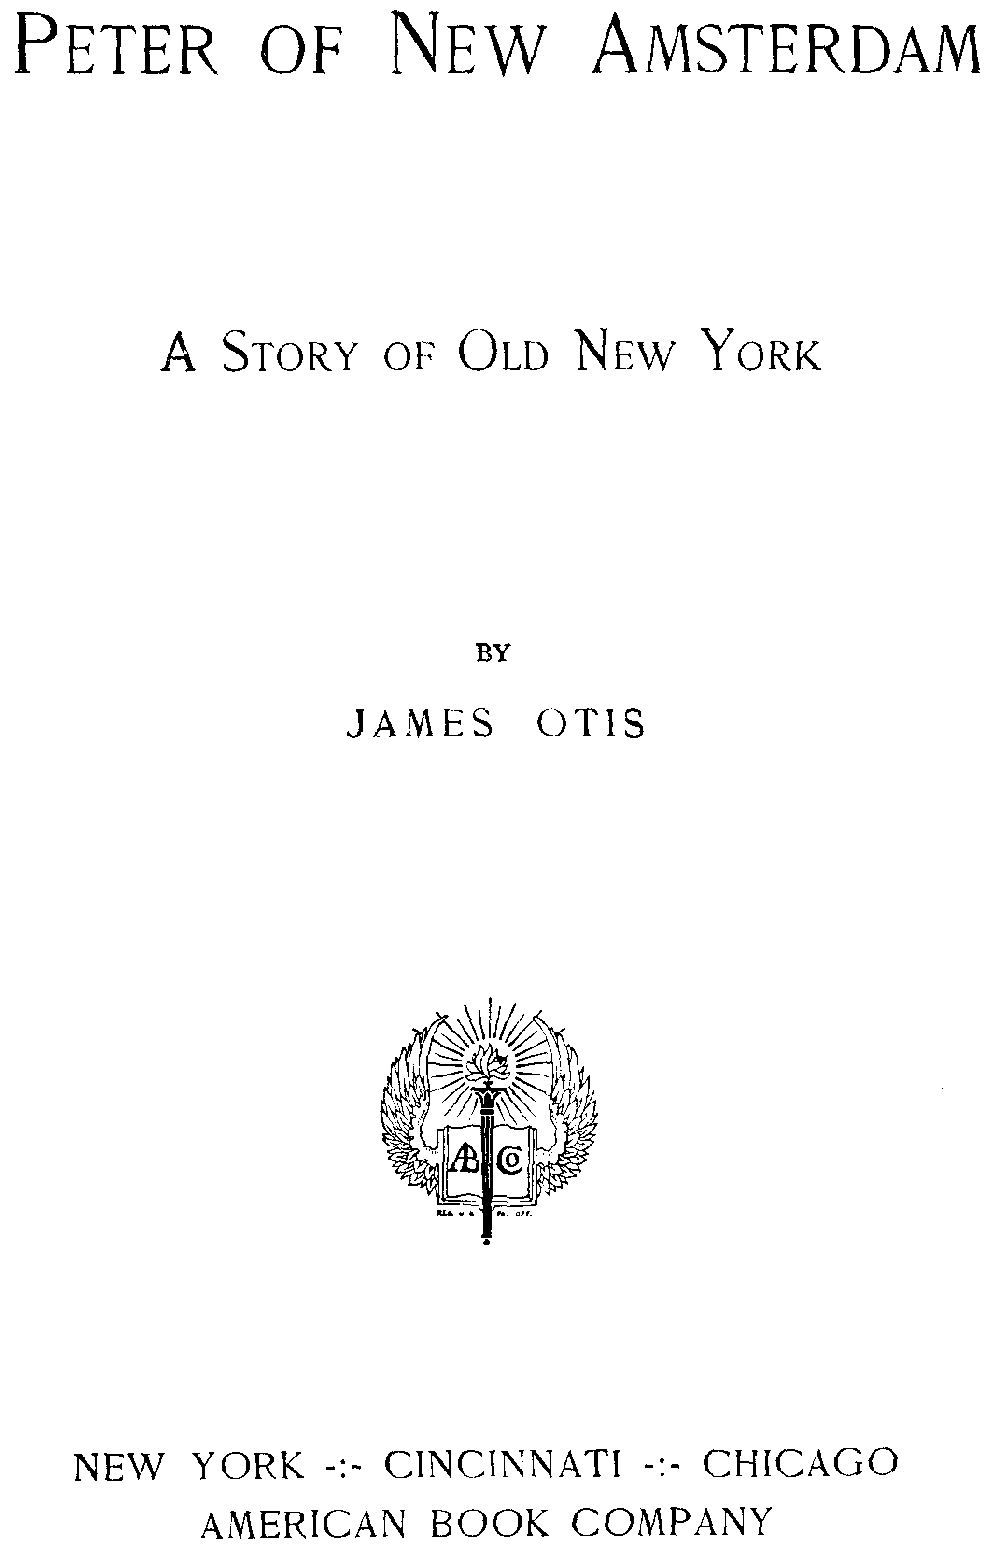 [Title Page] from Peter of New Amsterdam by James Otis